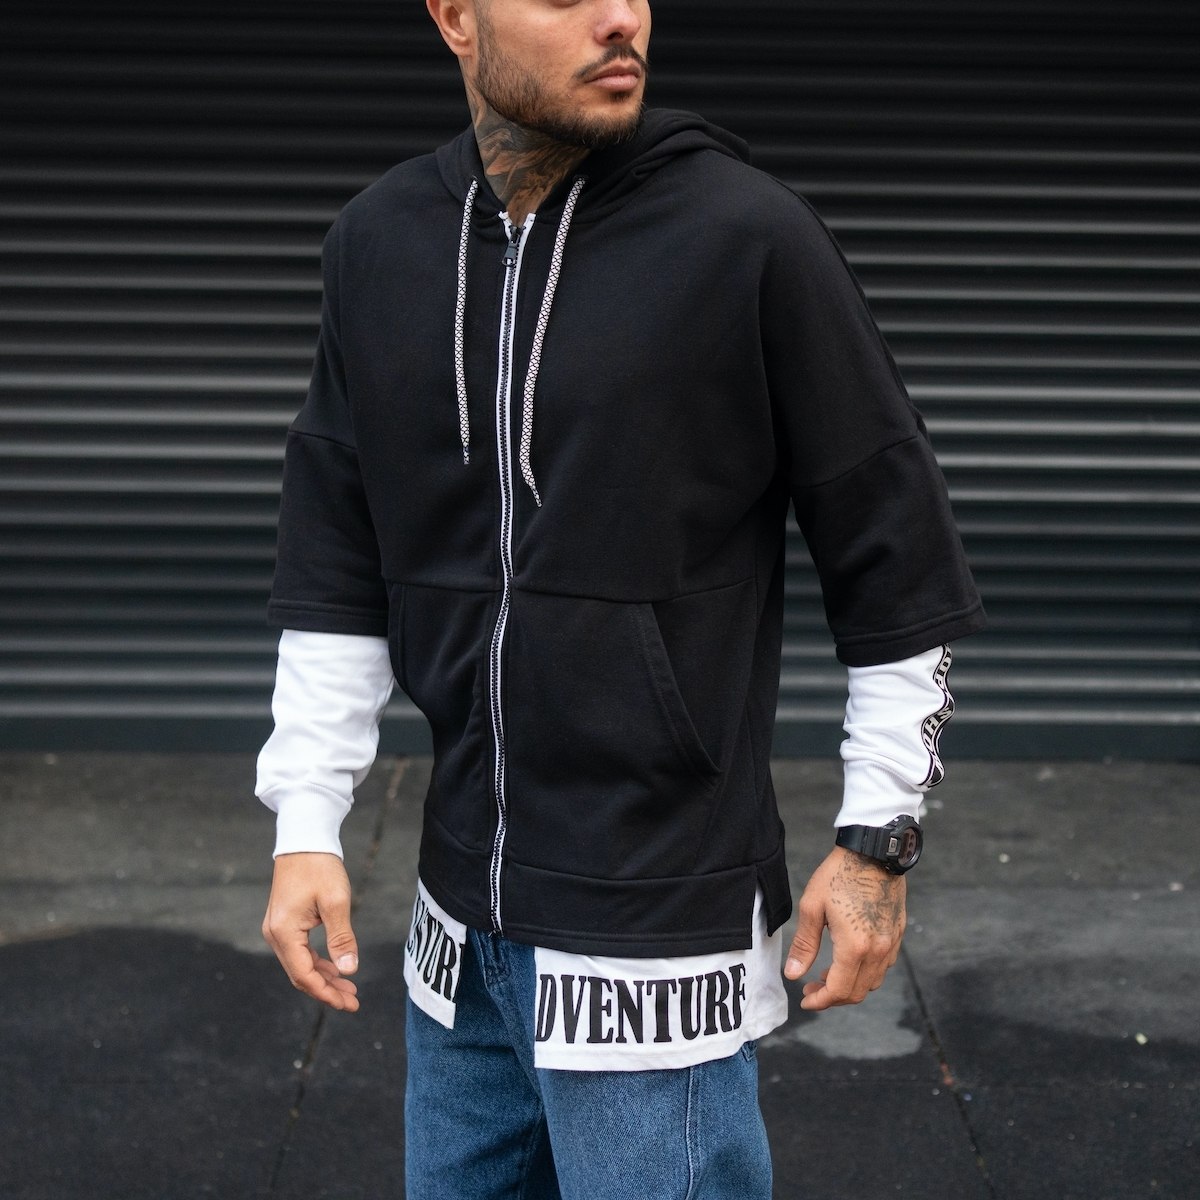 Black and White Hoodie with Fonts